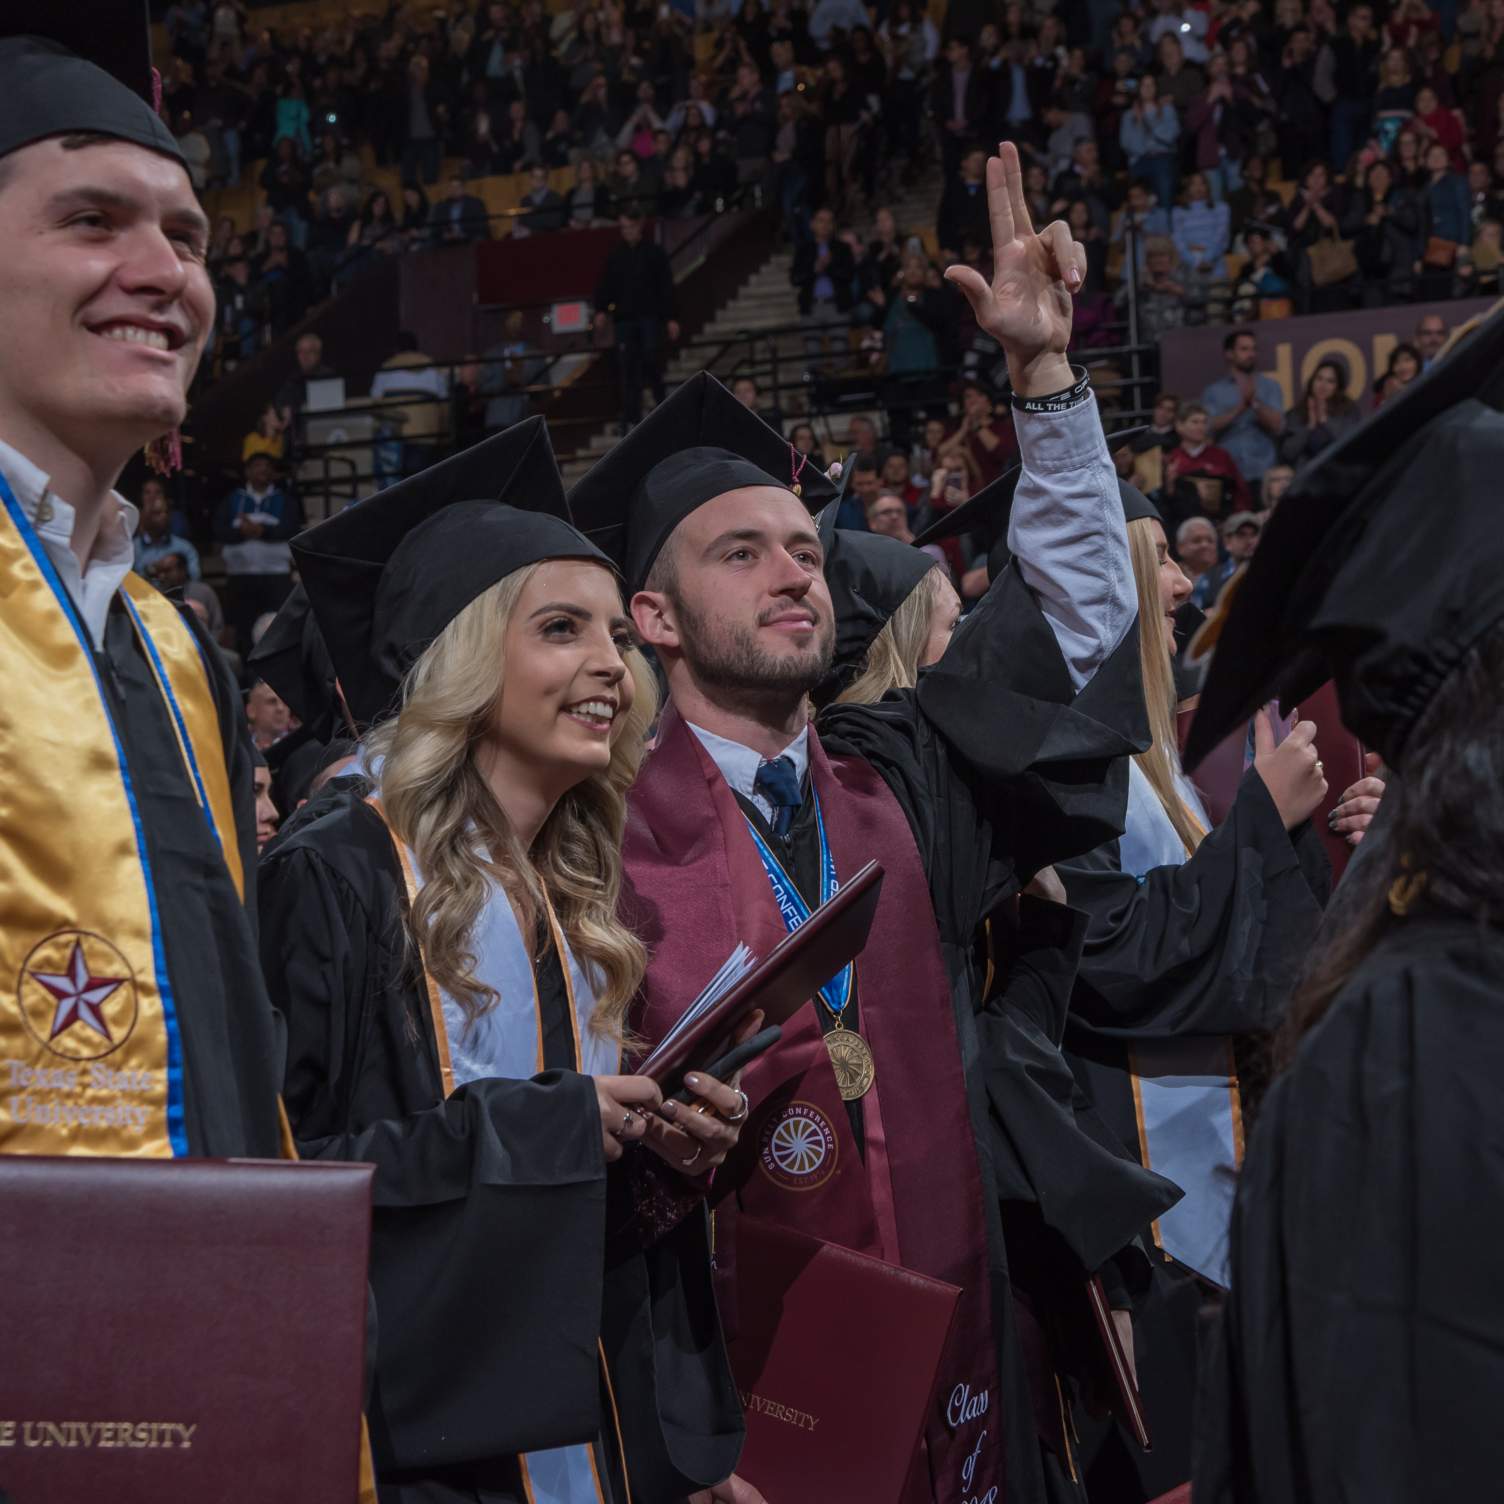 graduates holding diplomas, showing Texas State hand-sign